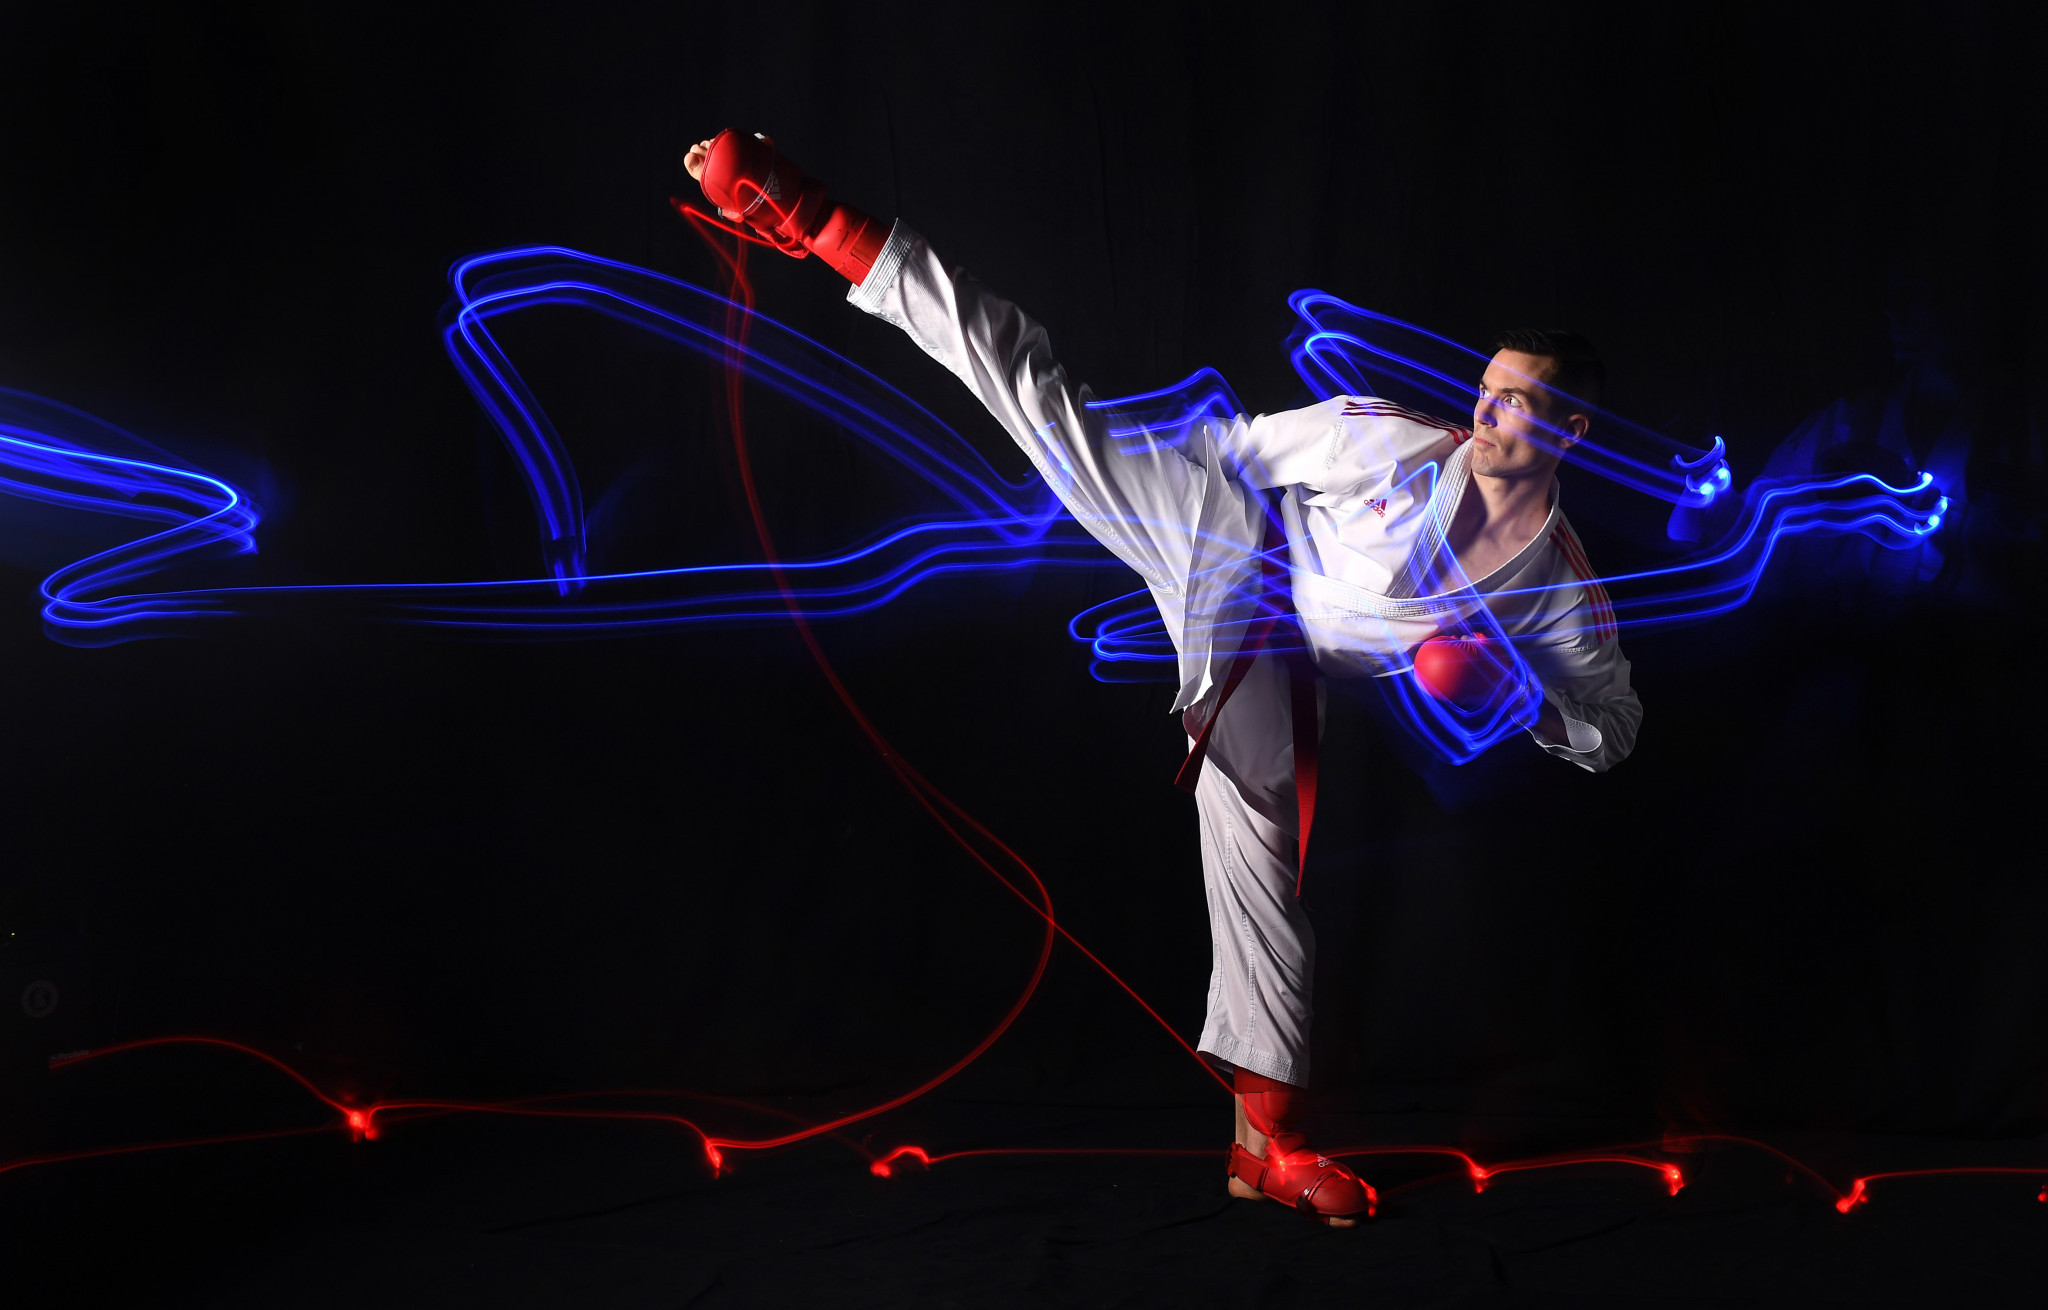 WKF launches #KarateSpirit campaign to capitalise on Tokyo 2020 debut